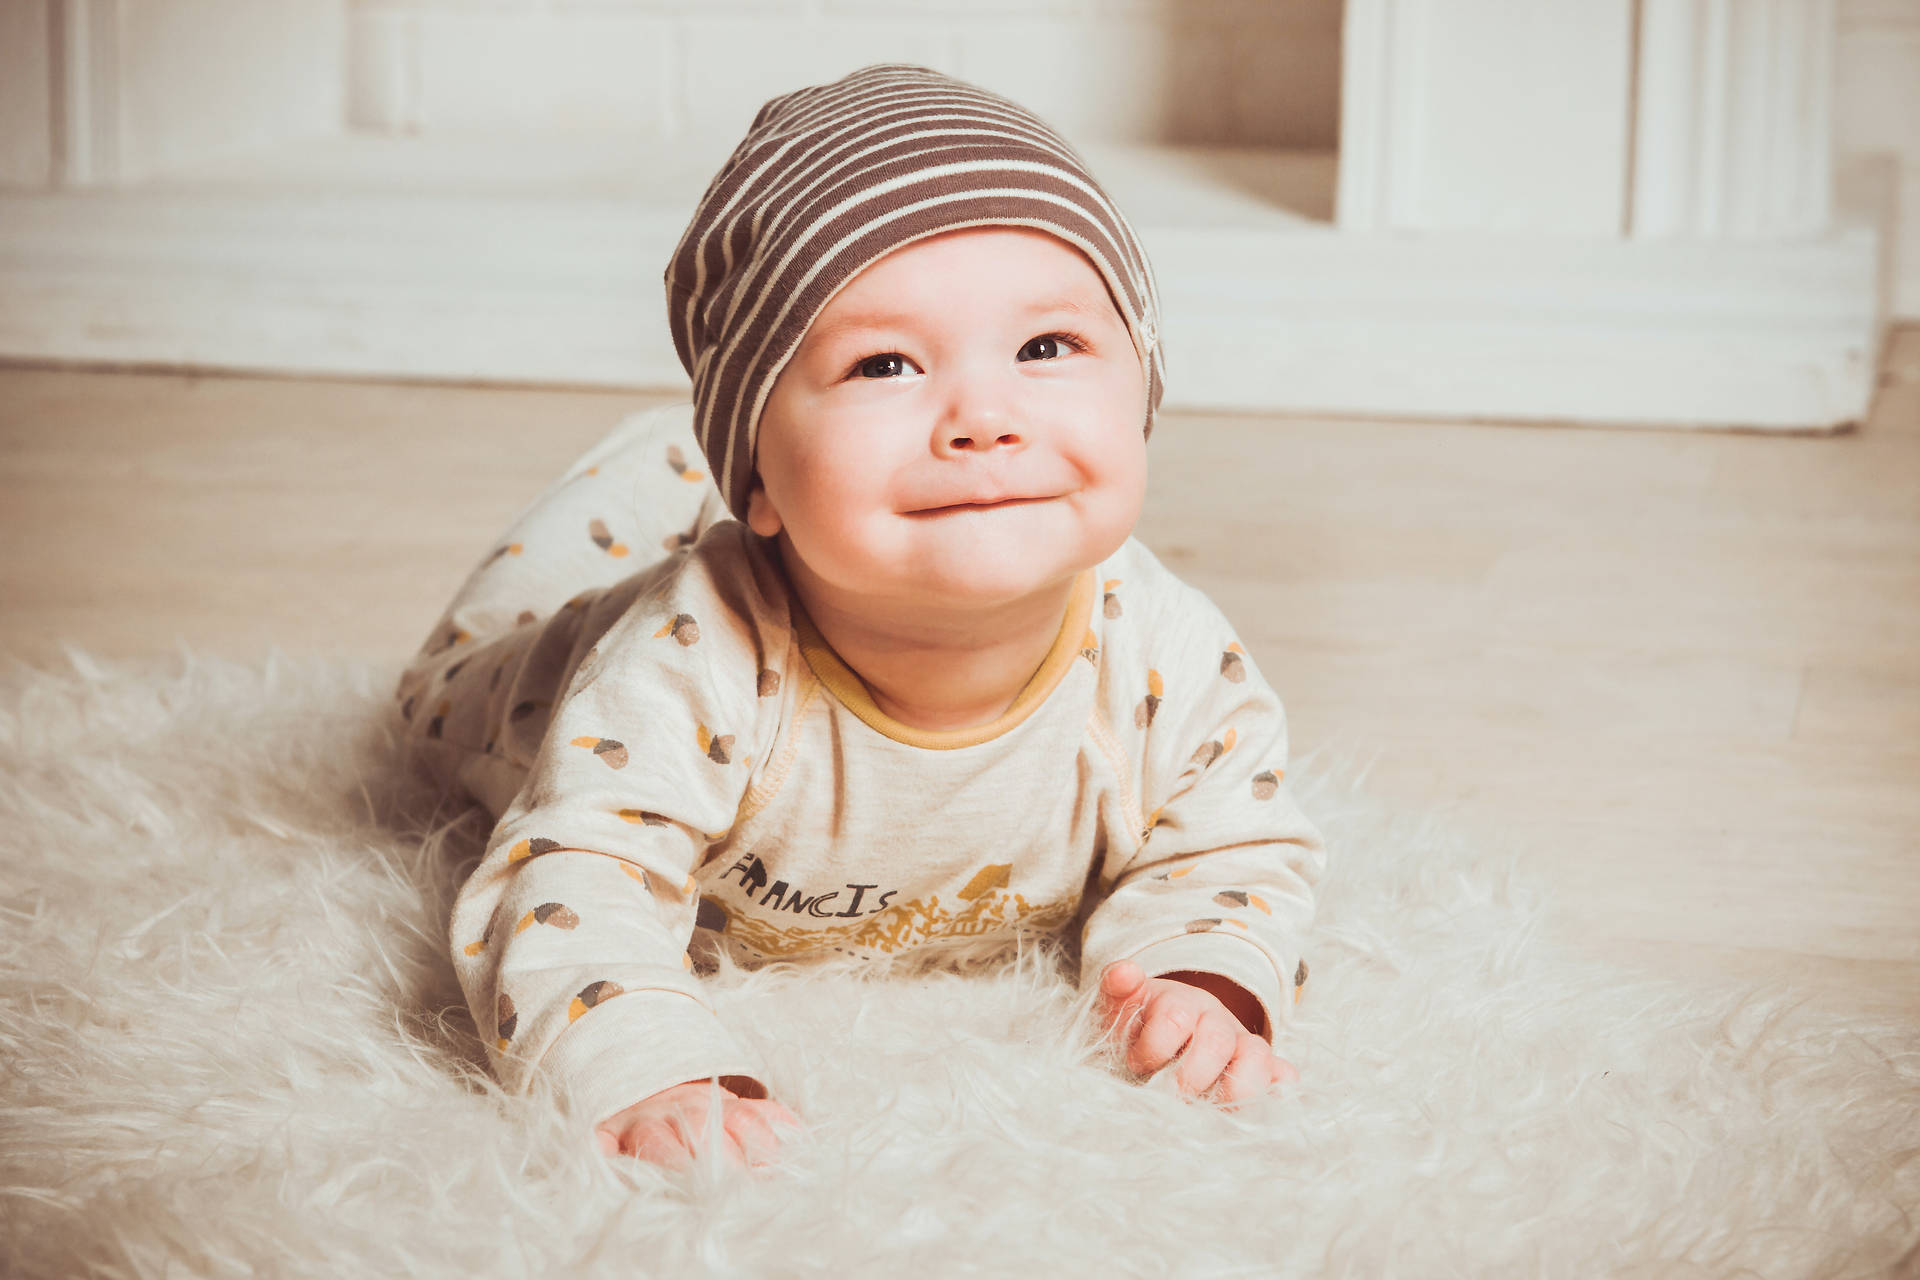 Adorable Baby with a Mischievous Smile Wallpaper